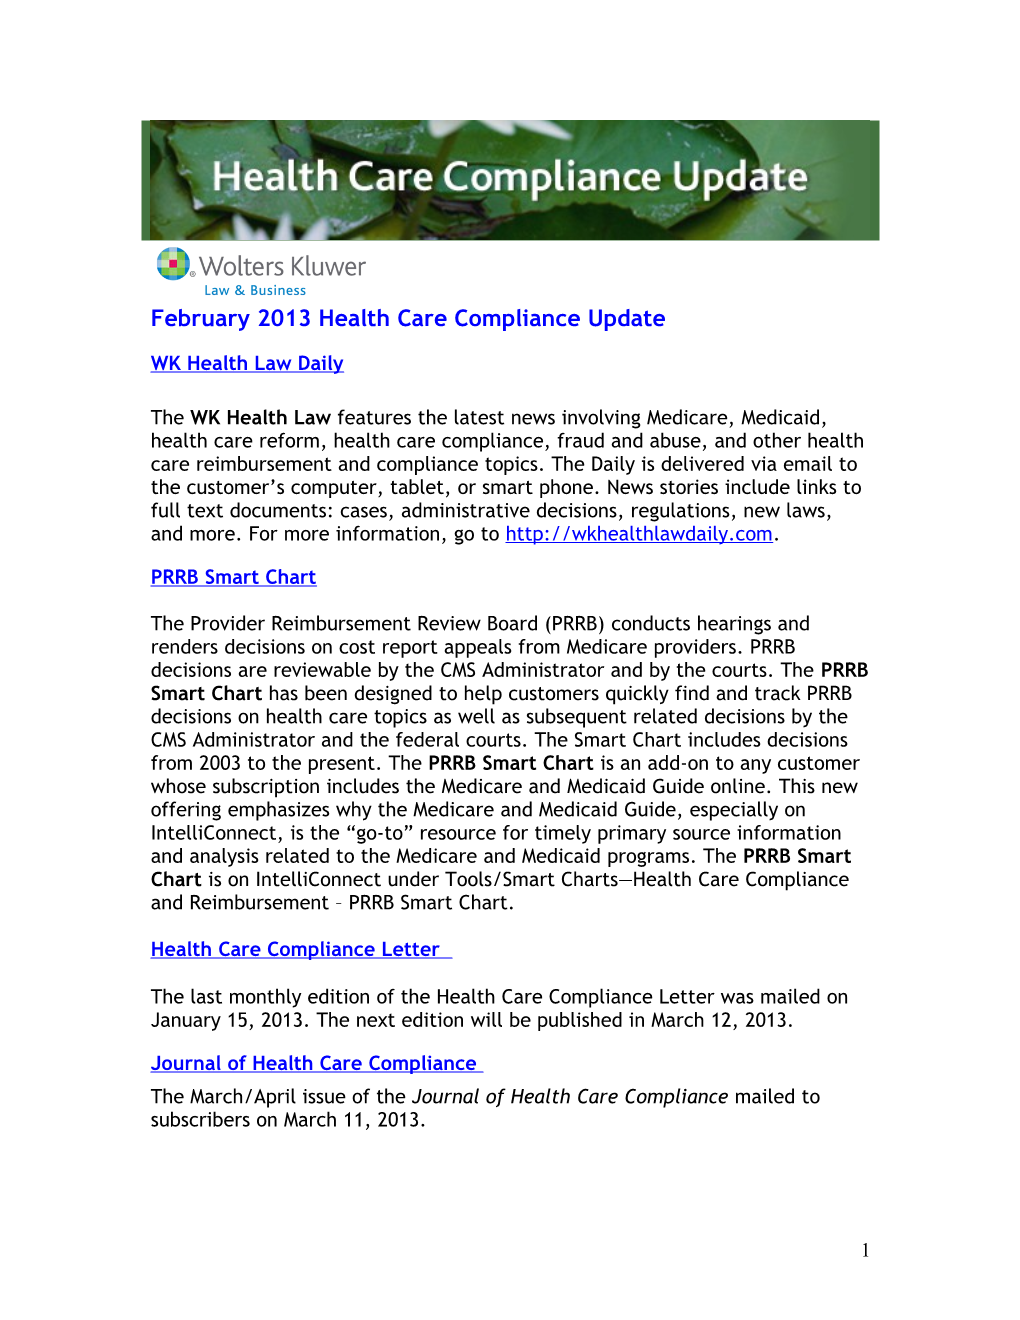 February 2013 Health Care Compliance Update